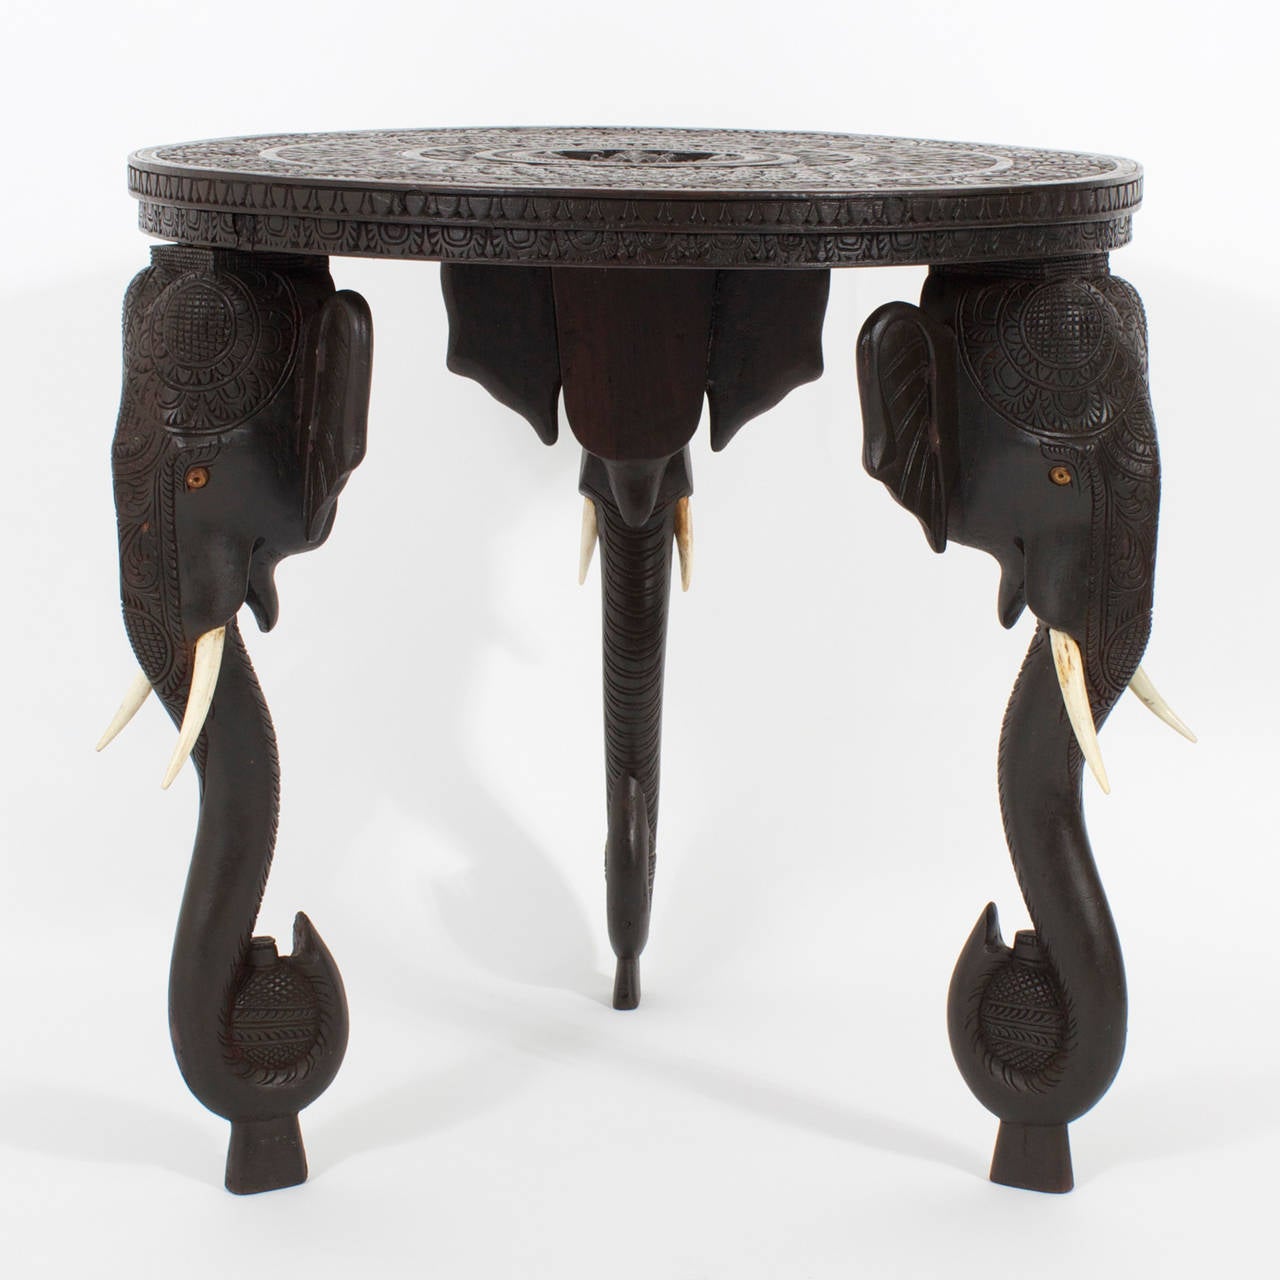 Exotic, vintage Anglo Indian occasional table, in a beautiful finish with 3 carved elephant head legs supporting a circular top carved in concentric rings of floral patterns and a figurative center.